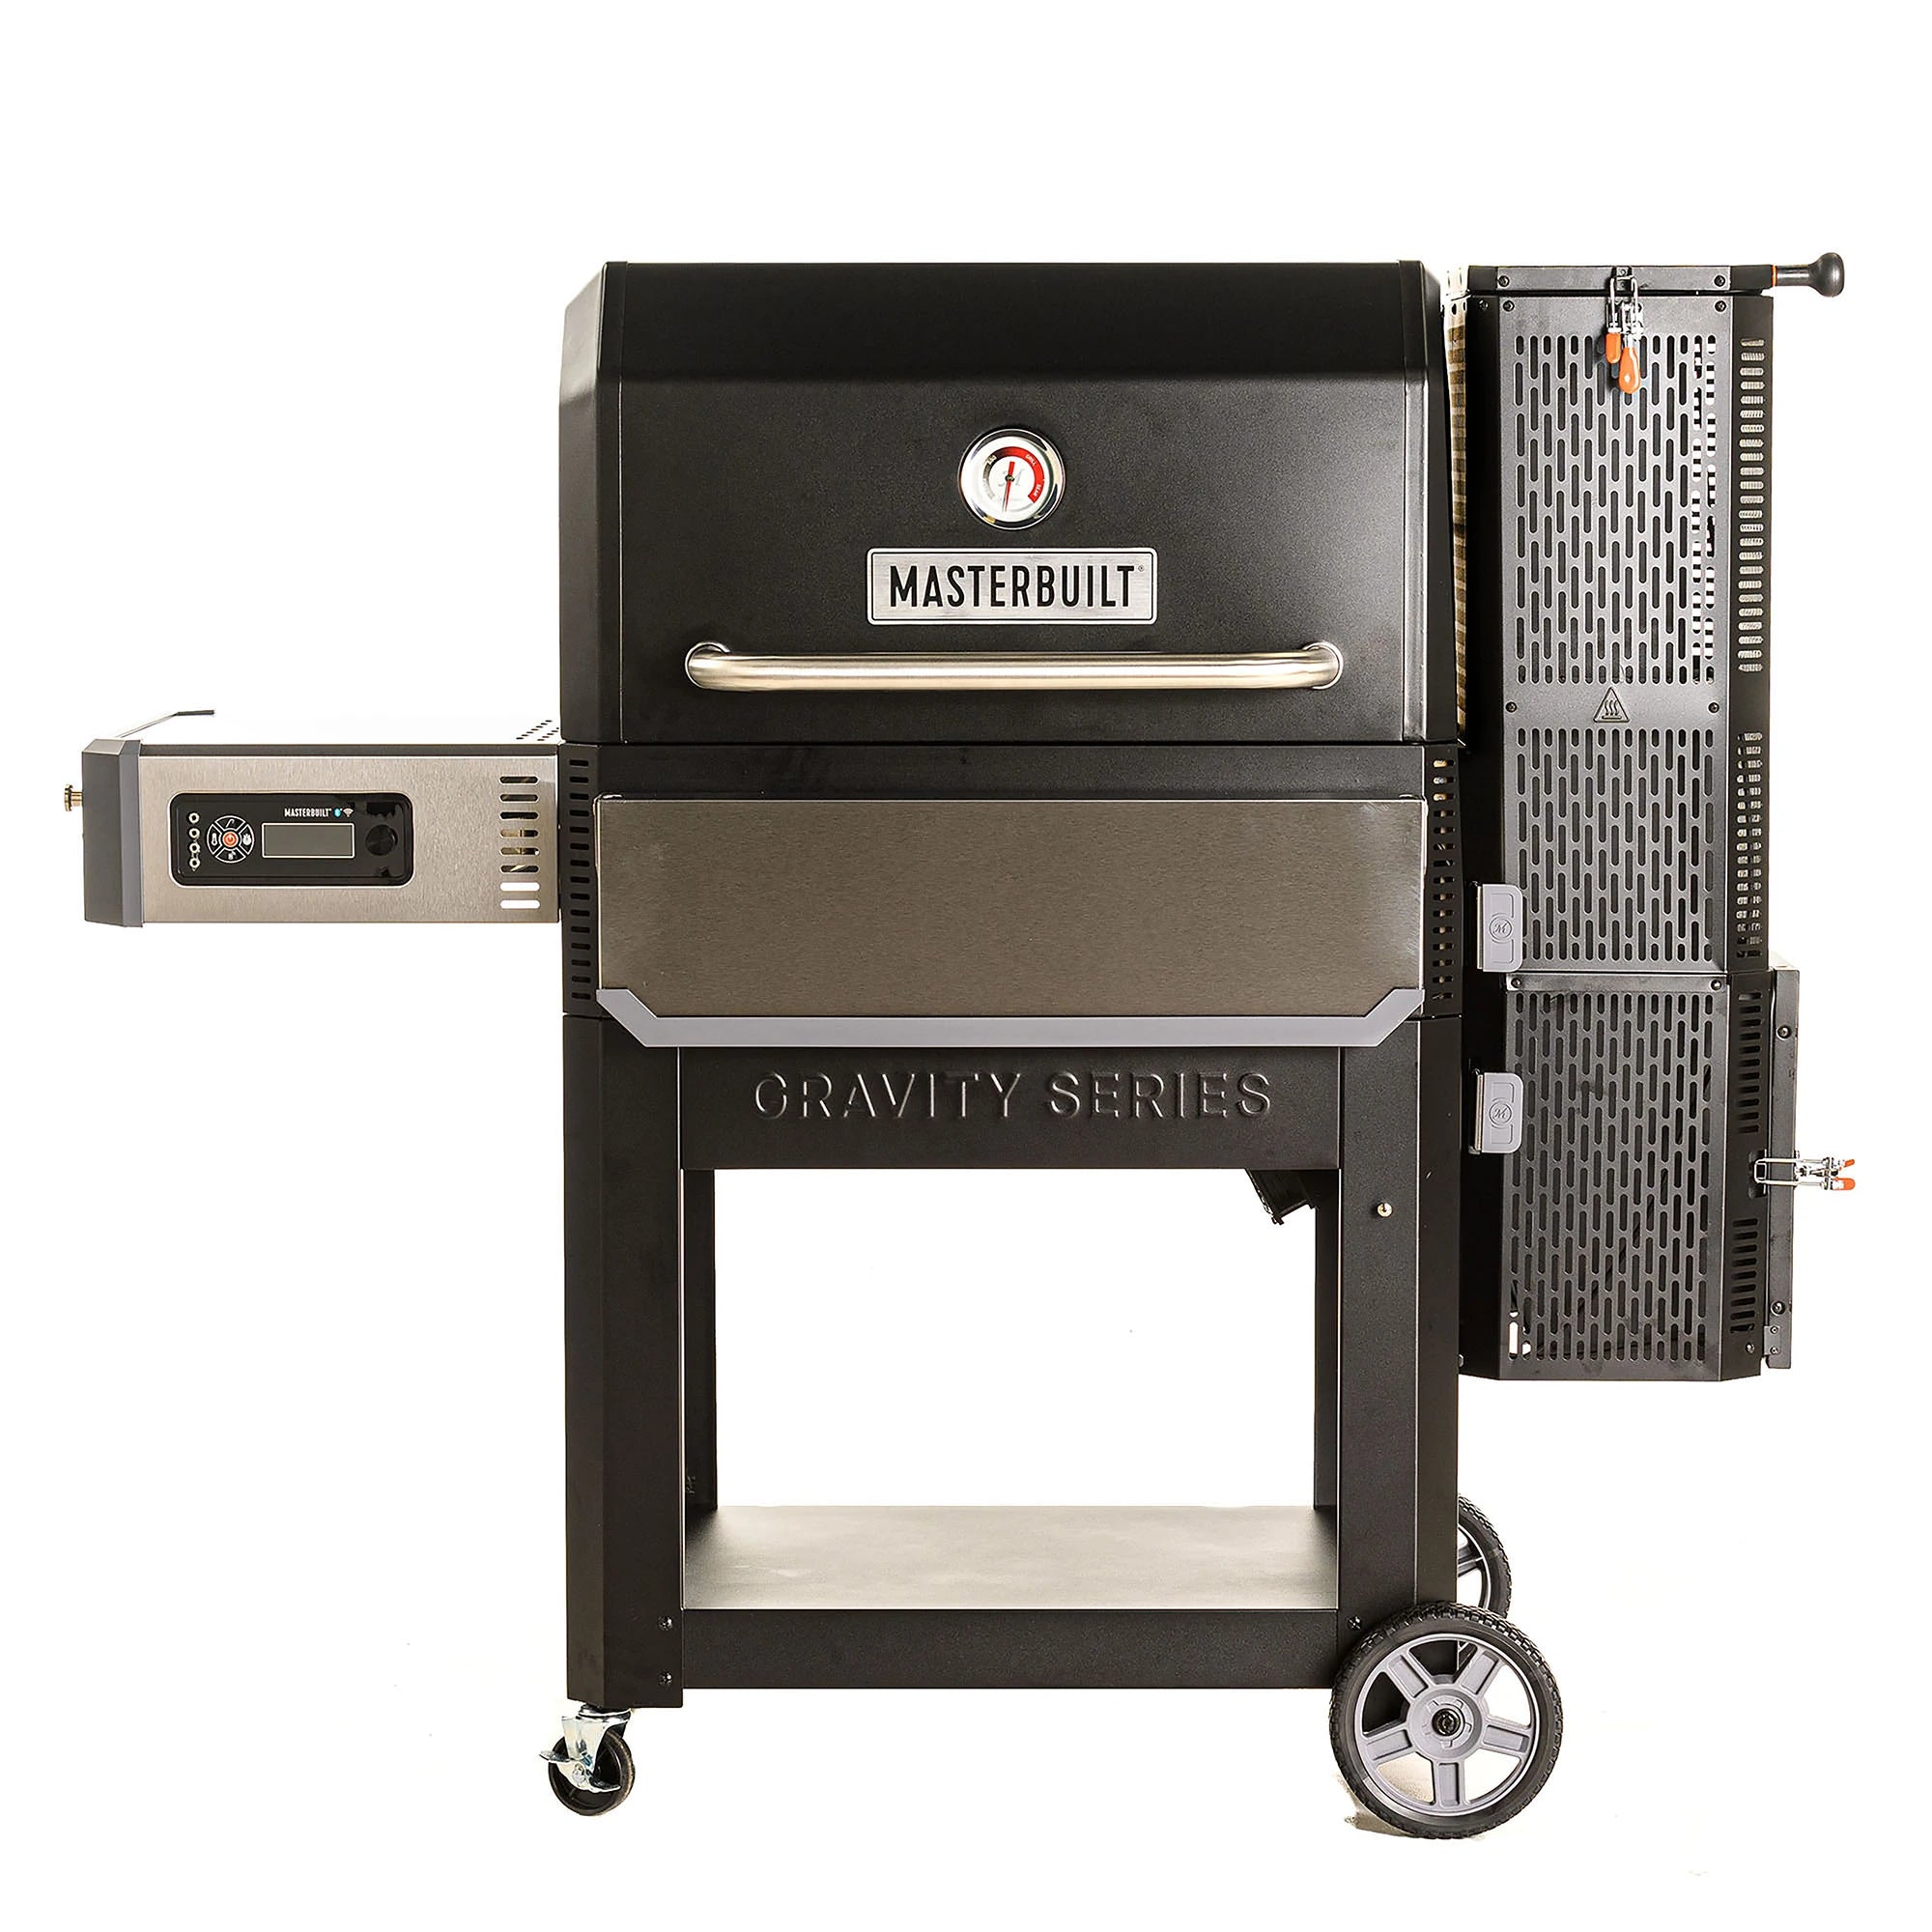 Rec Teq 700 Grill Table Plans - Seared and Smoked